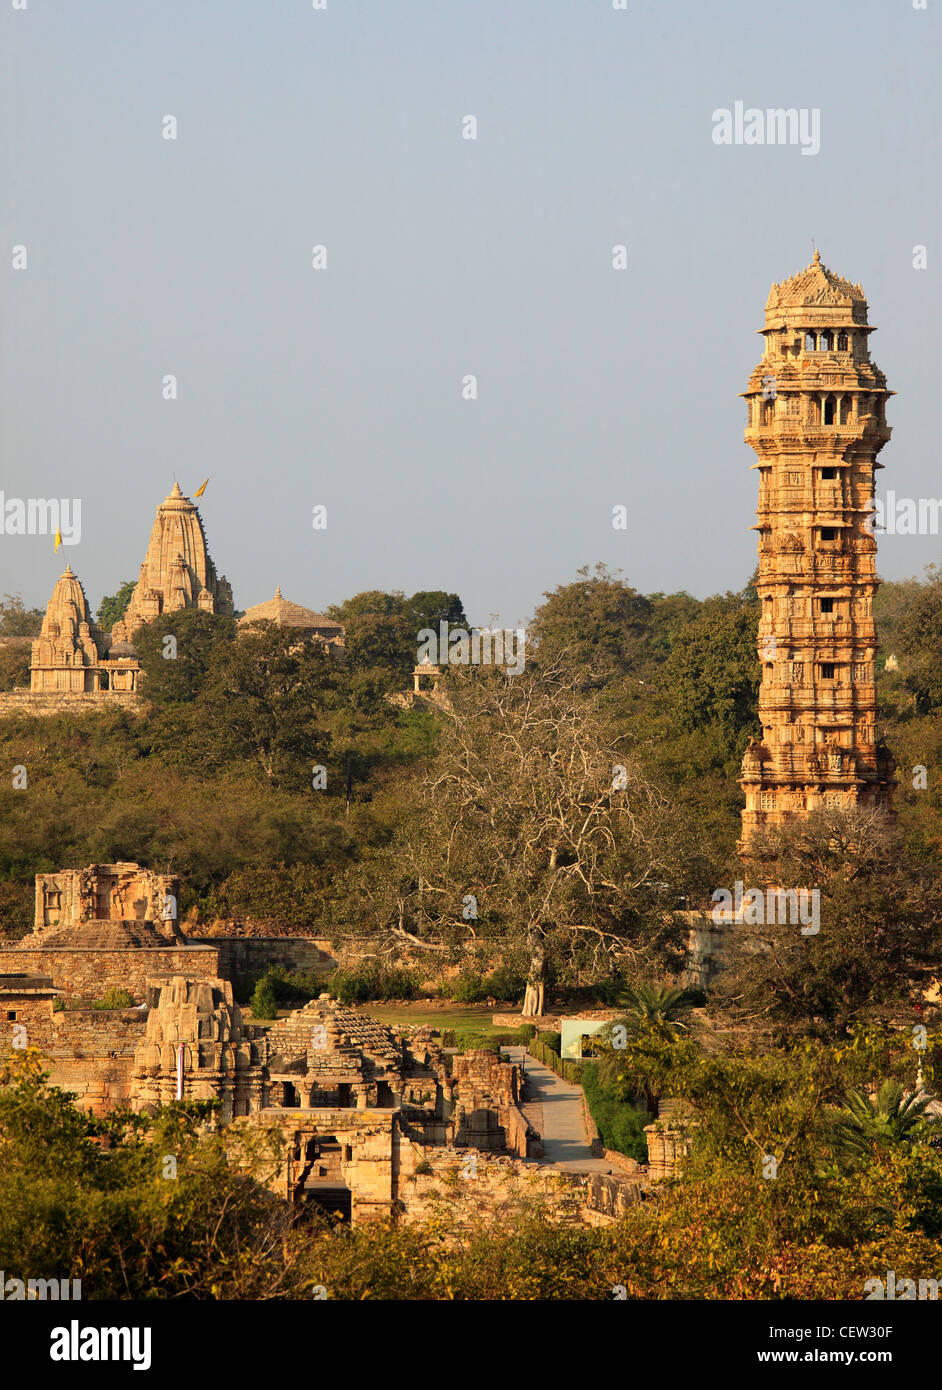 India, Rajasthan, Chittorgarh, Fort, general view, skyline, Tower of Victory, Stock Photo